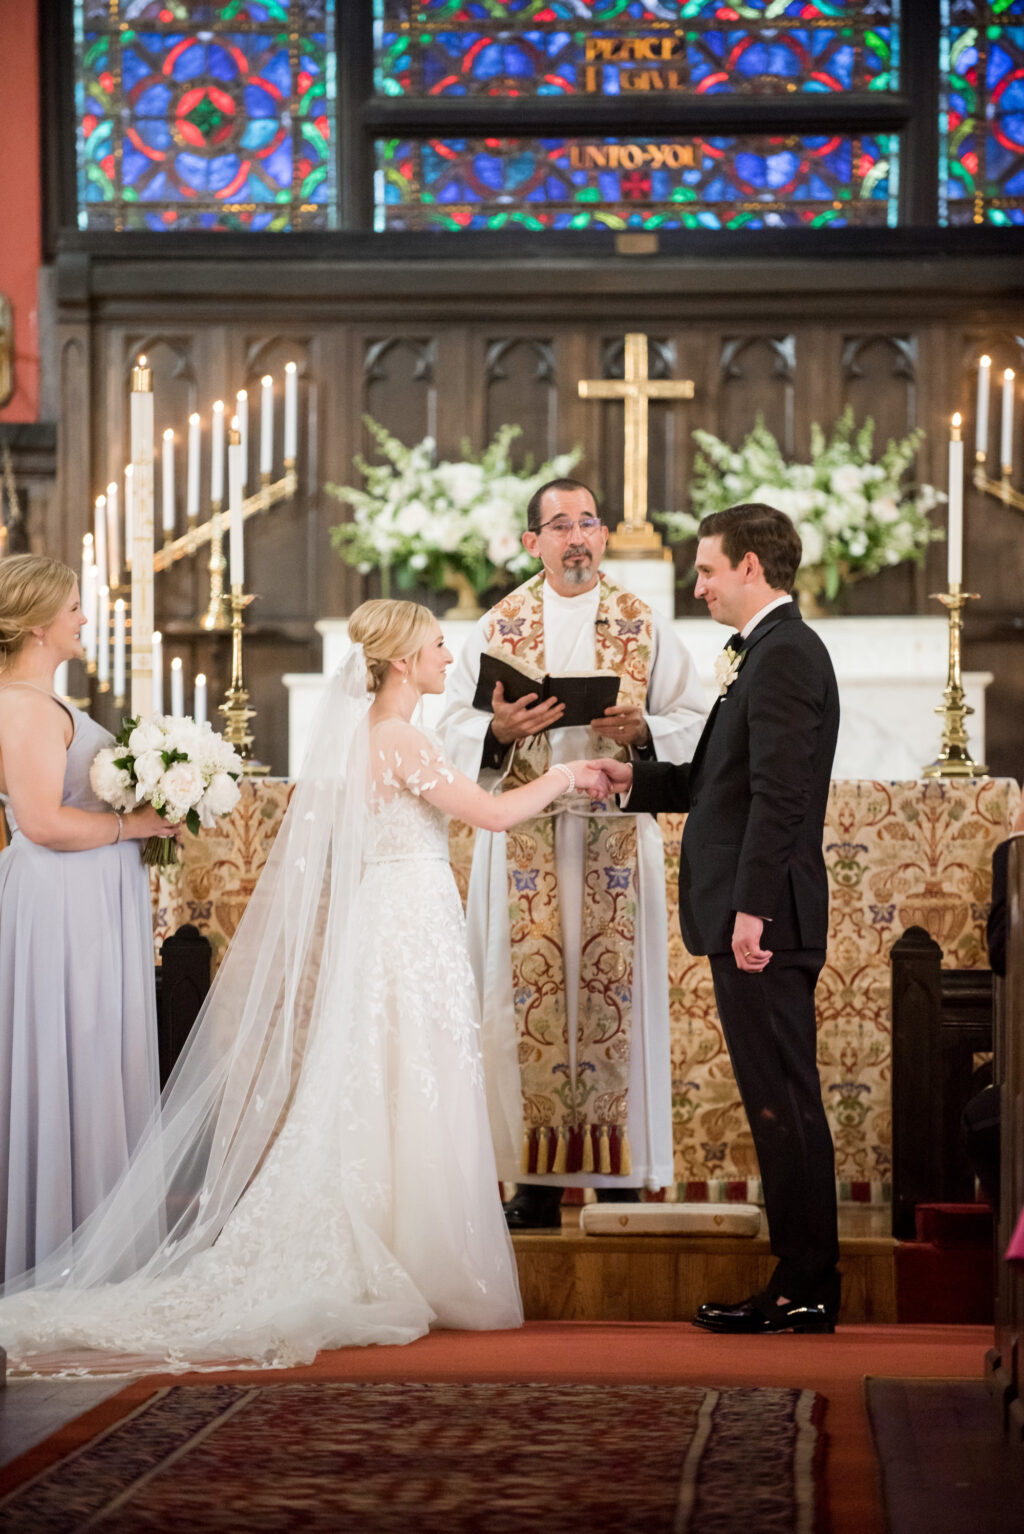 Bride and Groom Vow Exchange | Episcopal Church Wedding Ceremony Traditions Inspiration